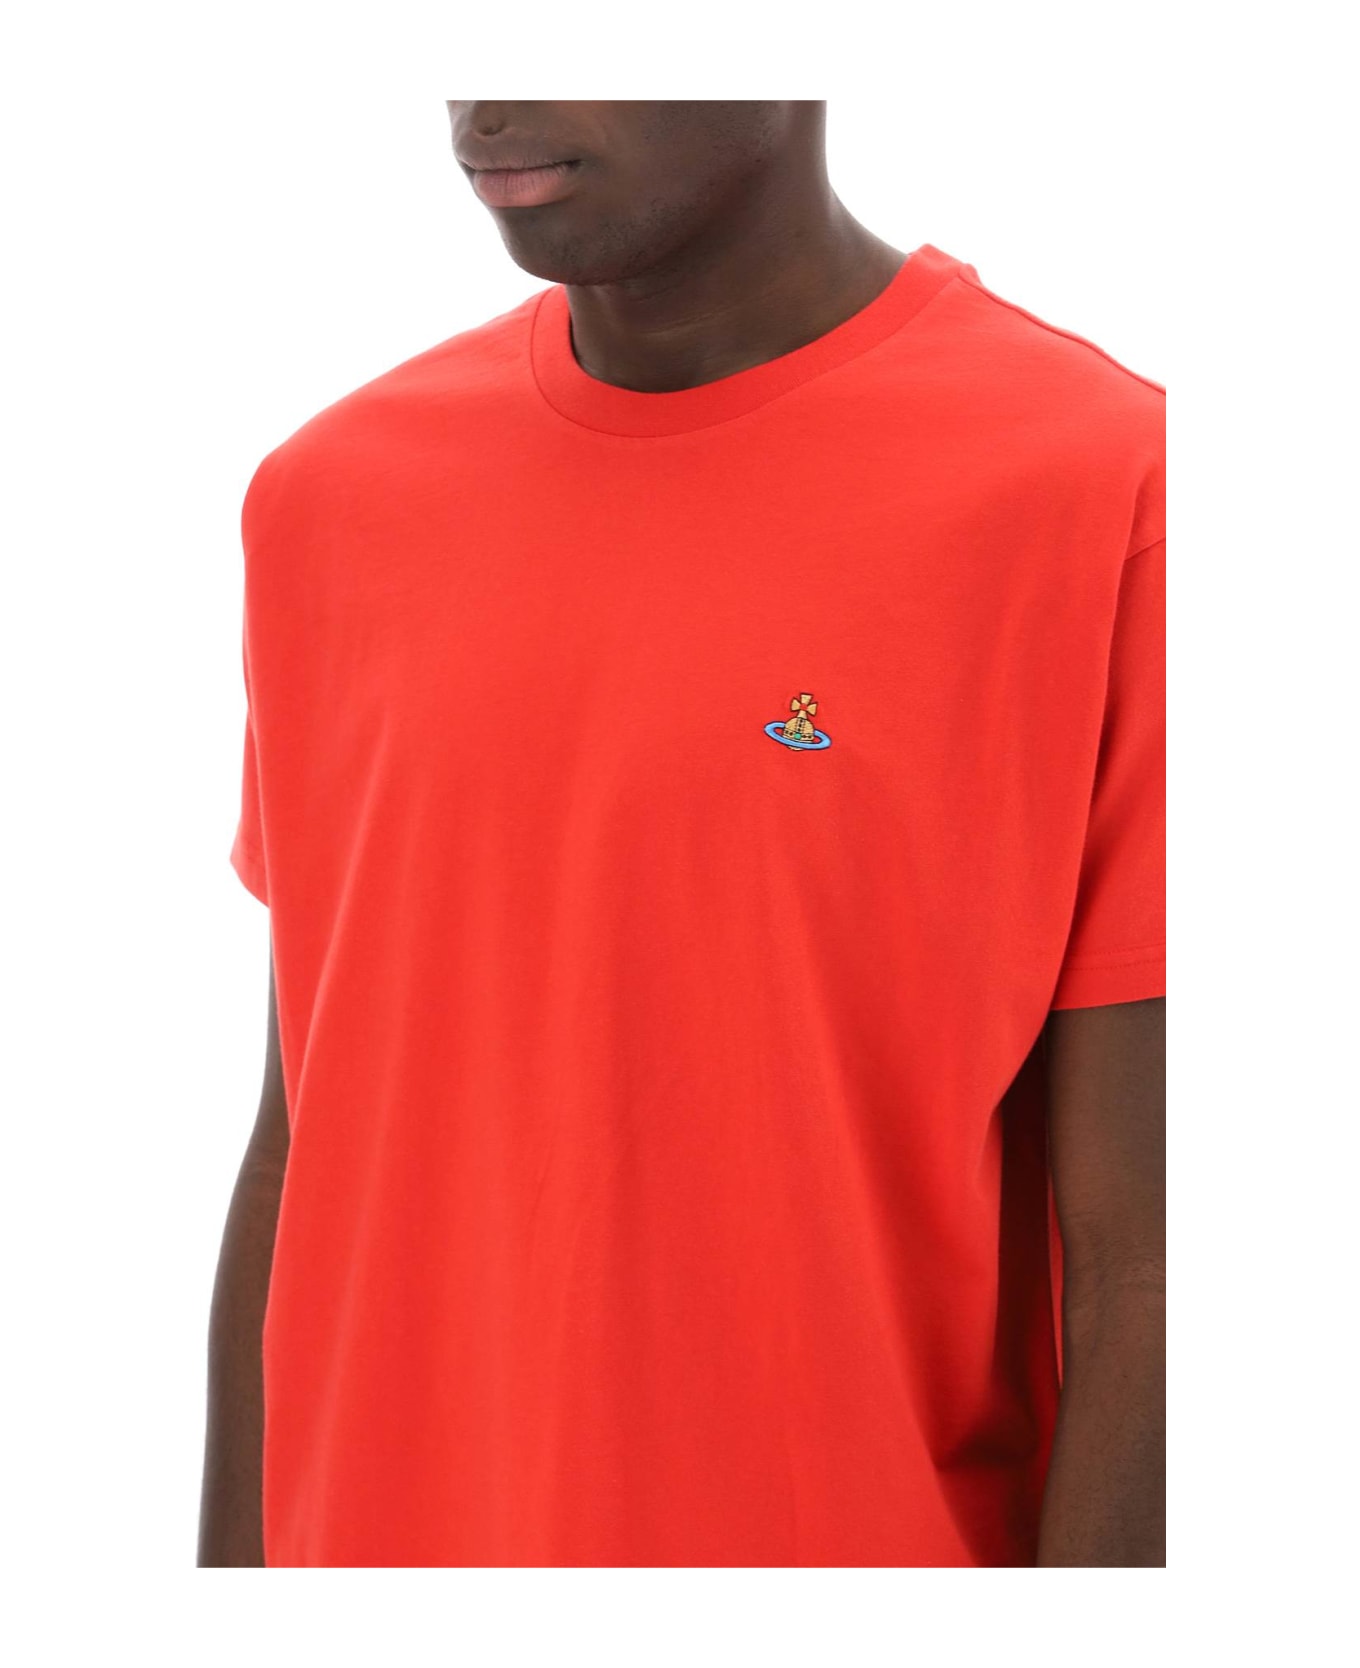 Vivienne Westwood Classic T-shirt With Orb Logo - RED (Red) Tシャツ